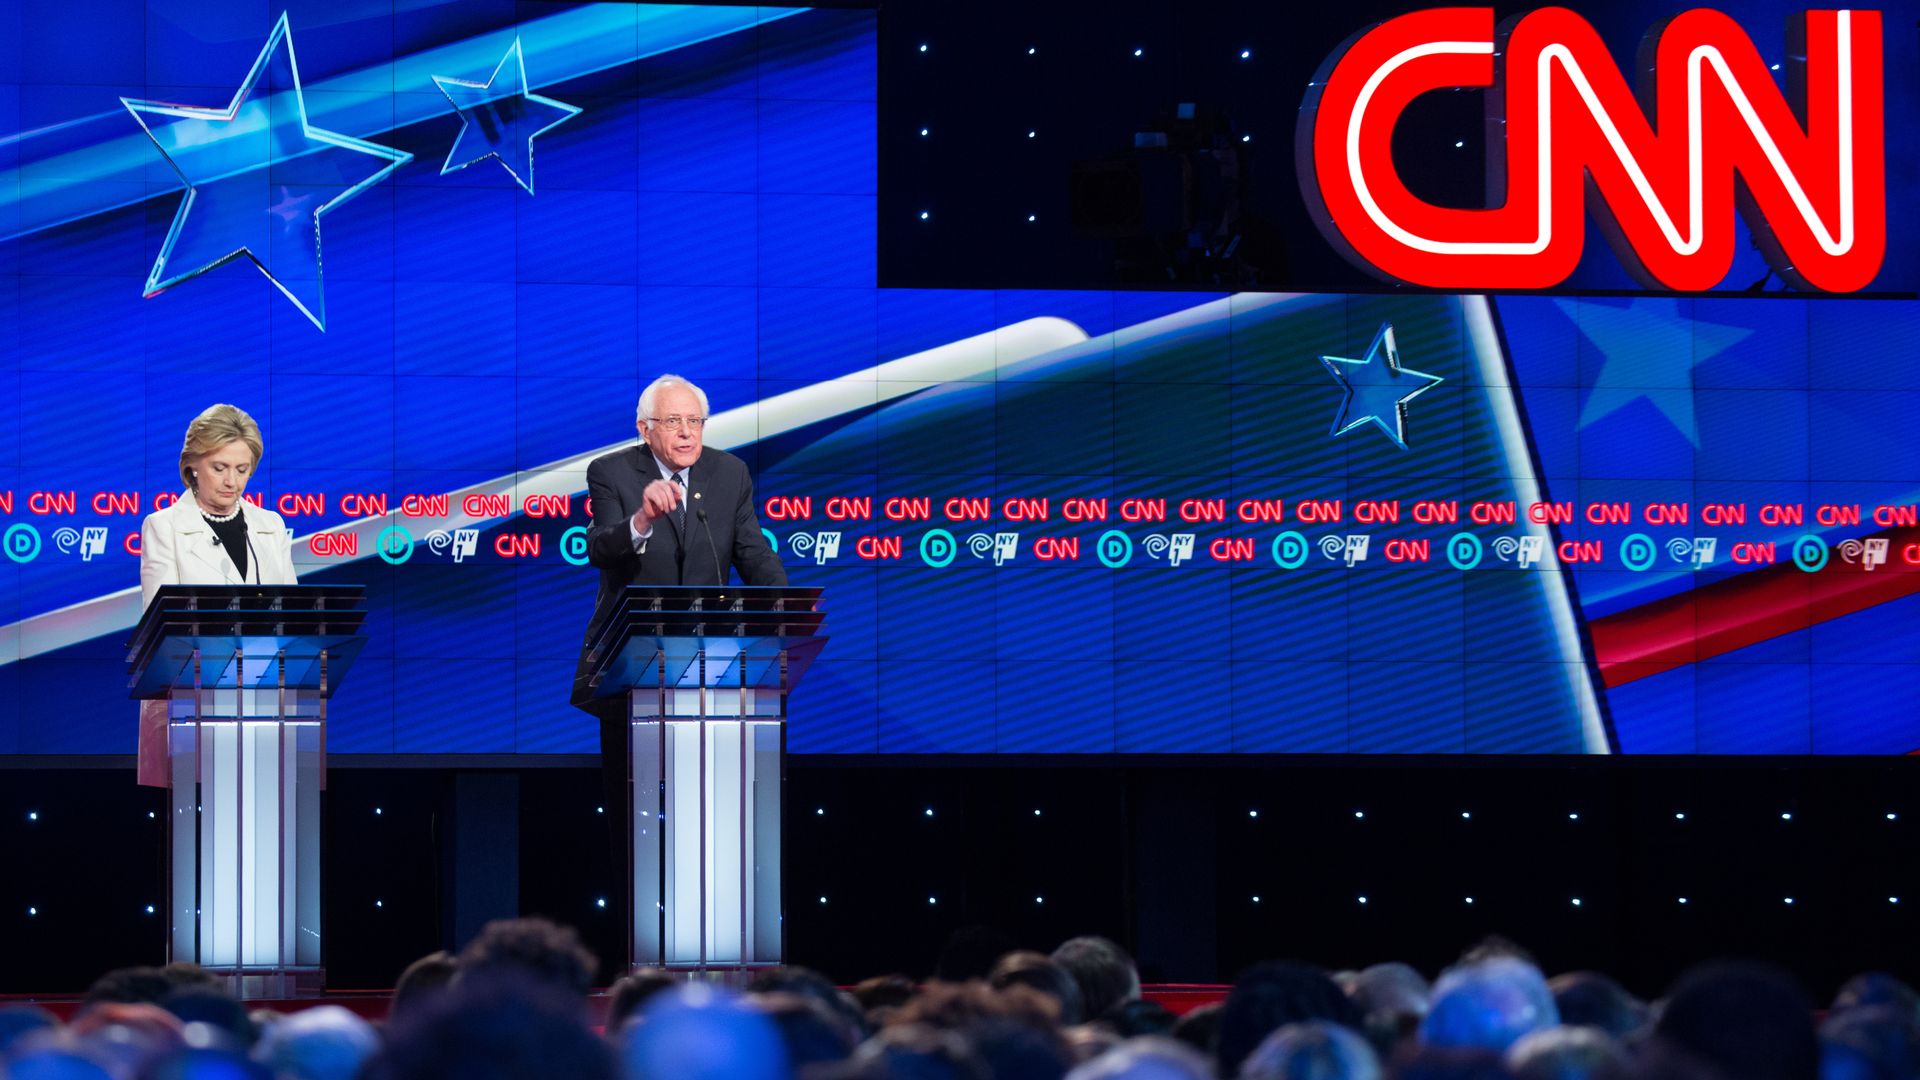 Hillary Clinton and Bernie Sanders during the 2016 Democratic candidate debates hosted by CNN